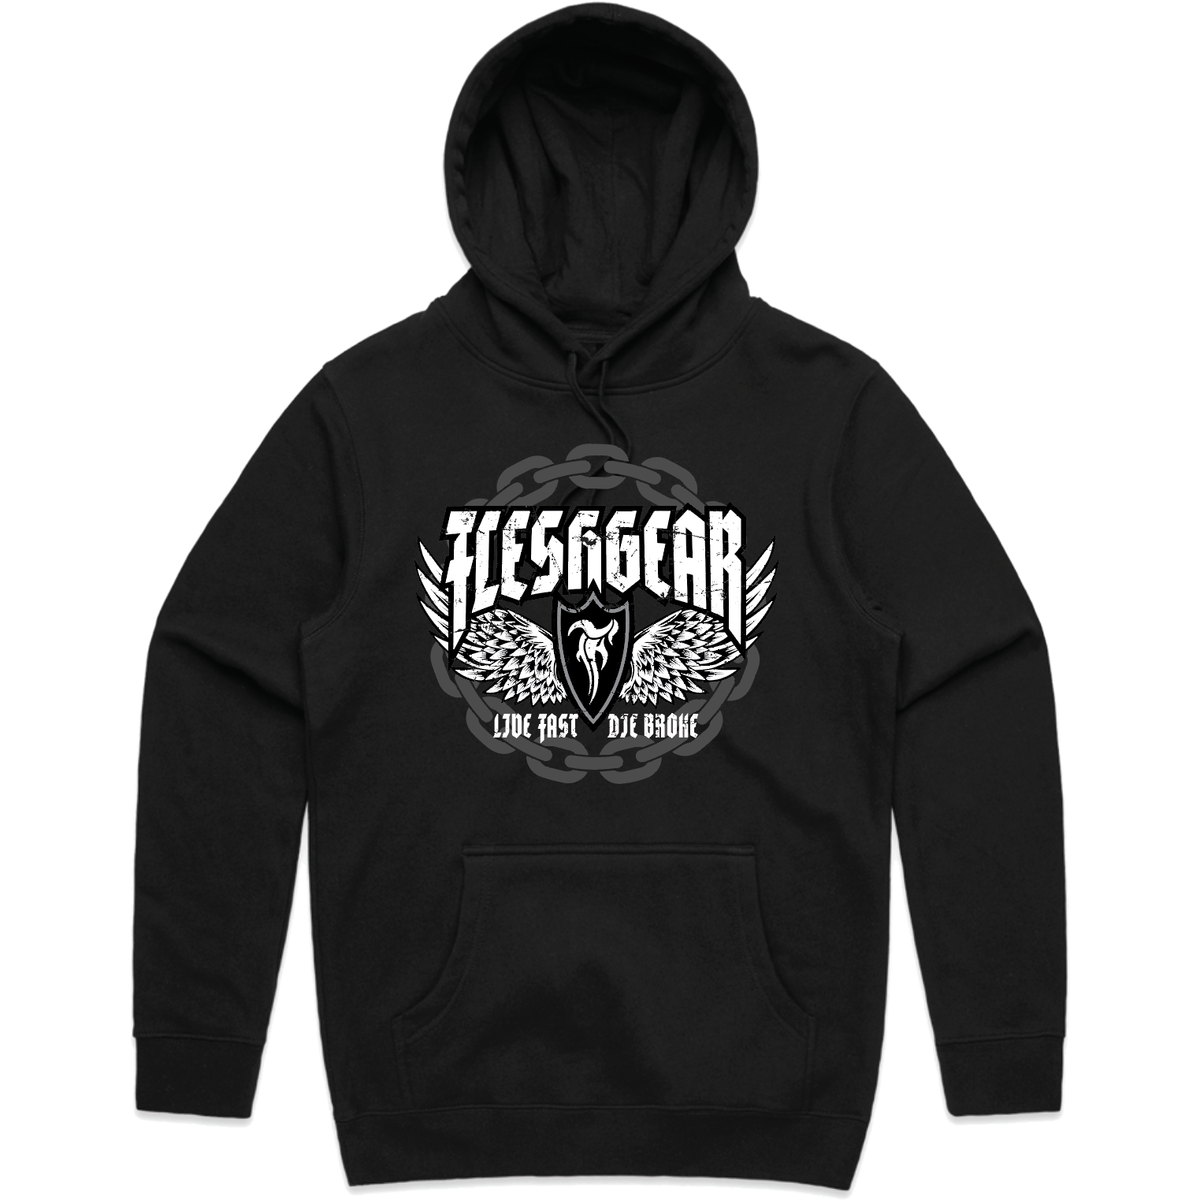 FLESHGEAR-Men's-Knit-Hooded-Pullover-Chain - PULLOVER HOODIE - Synik Clothing - synikclothing.com